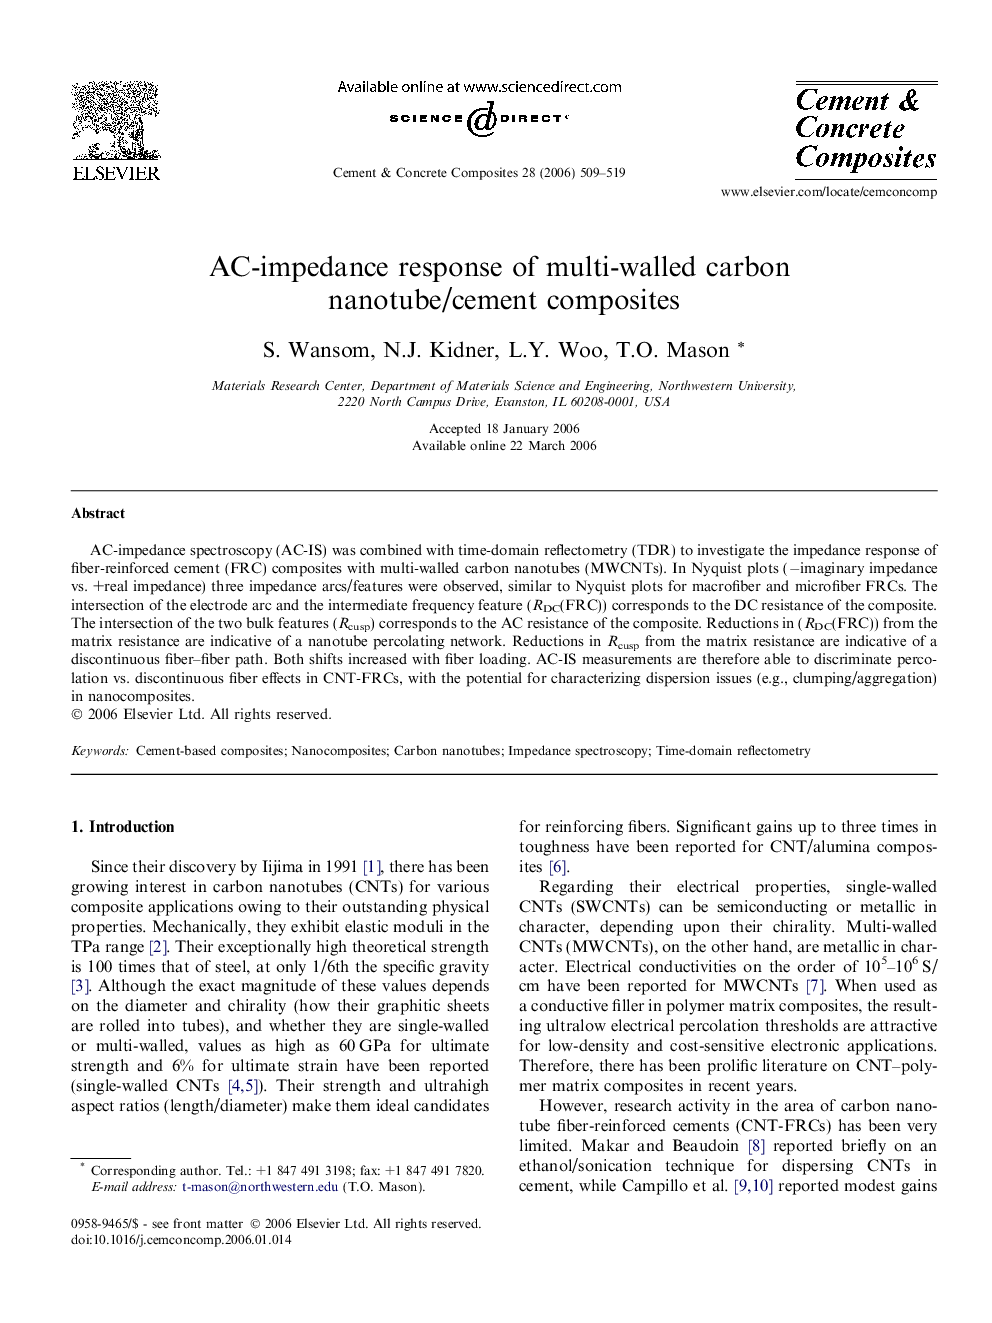 AC-impedance response of multi-walled carbon nanotube/cement composites